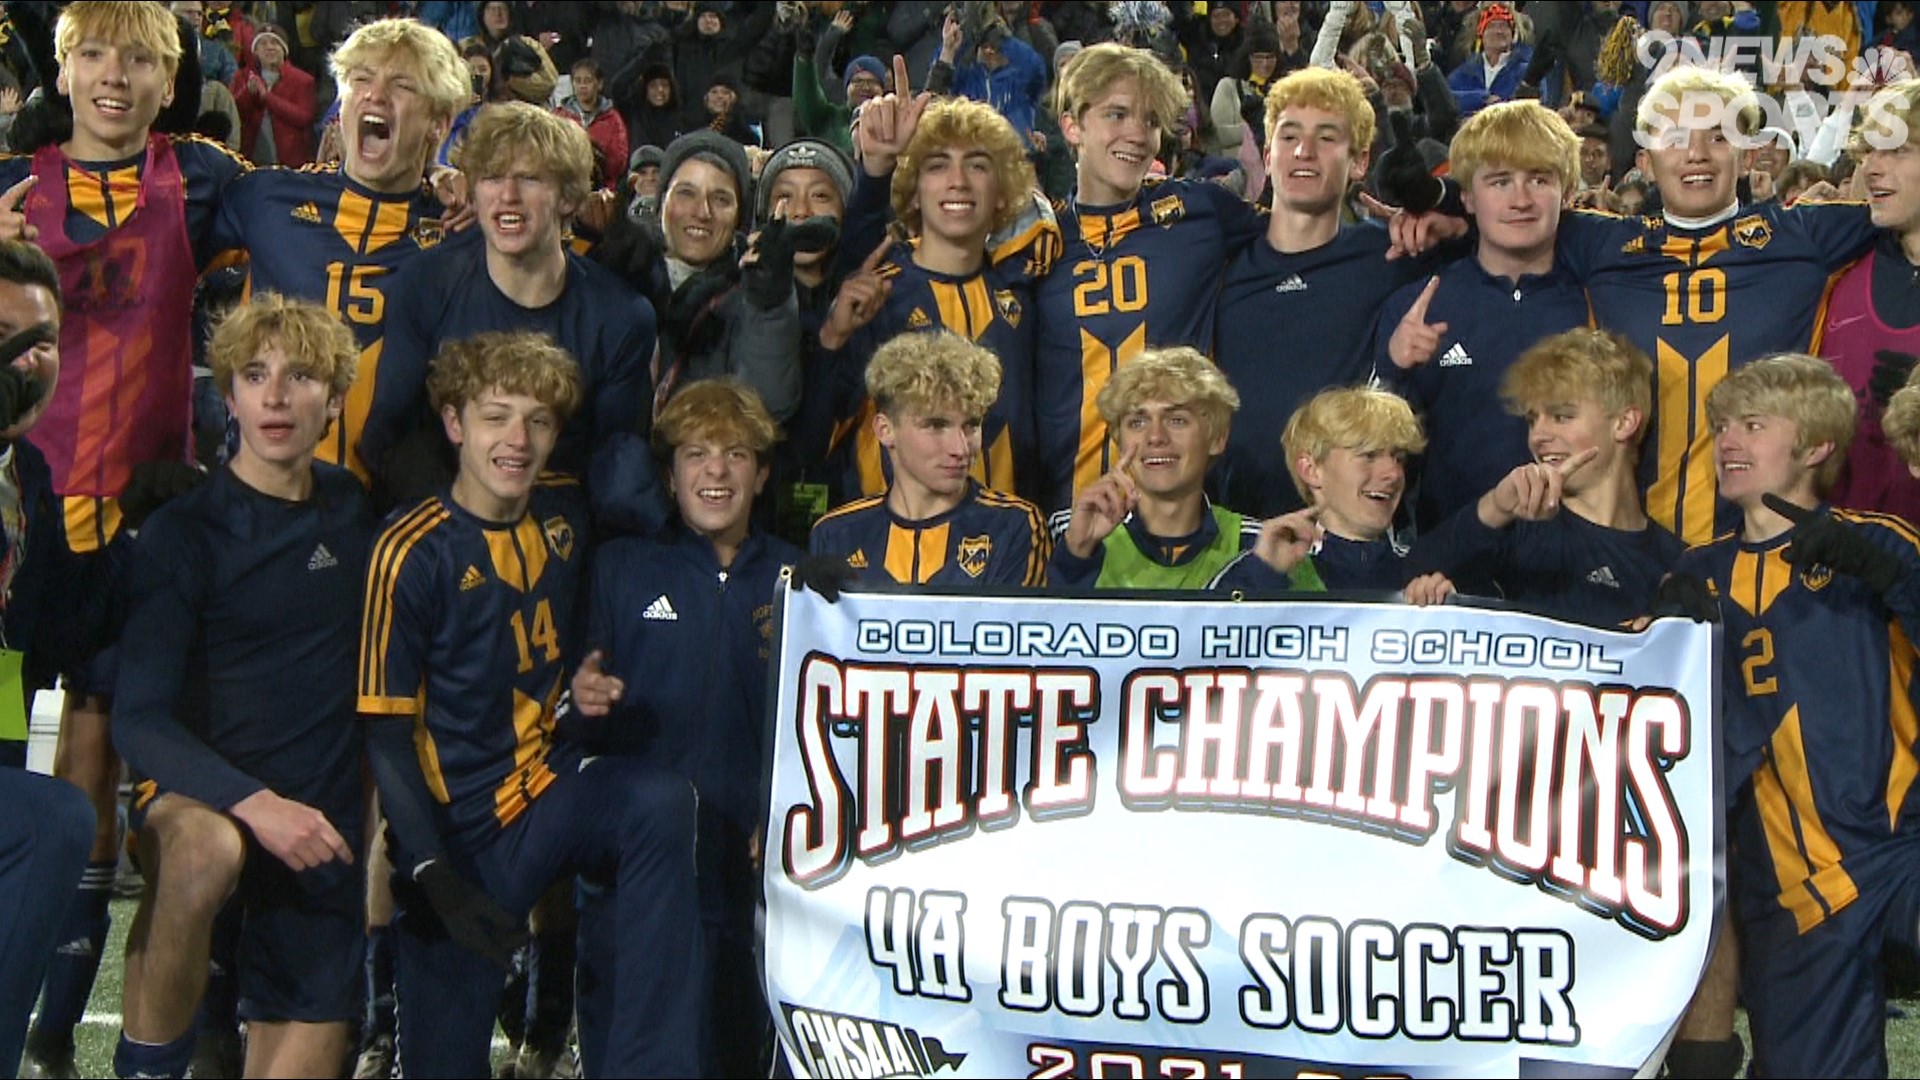 The Nighthawks capped off a perfect season with the Class 4A state title on Friday night at Weidner Field.